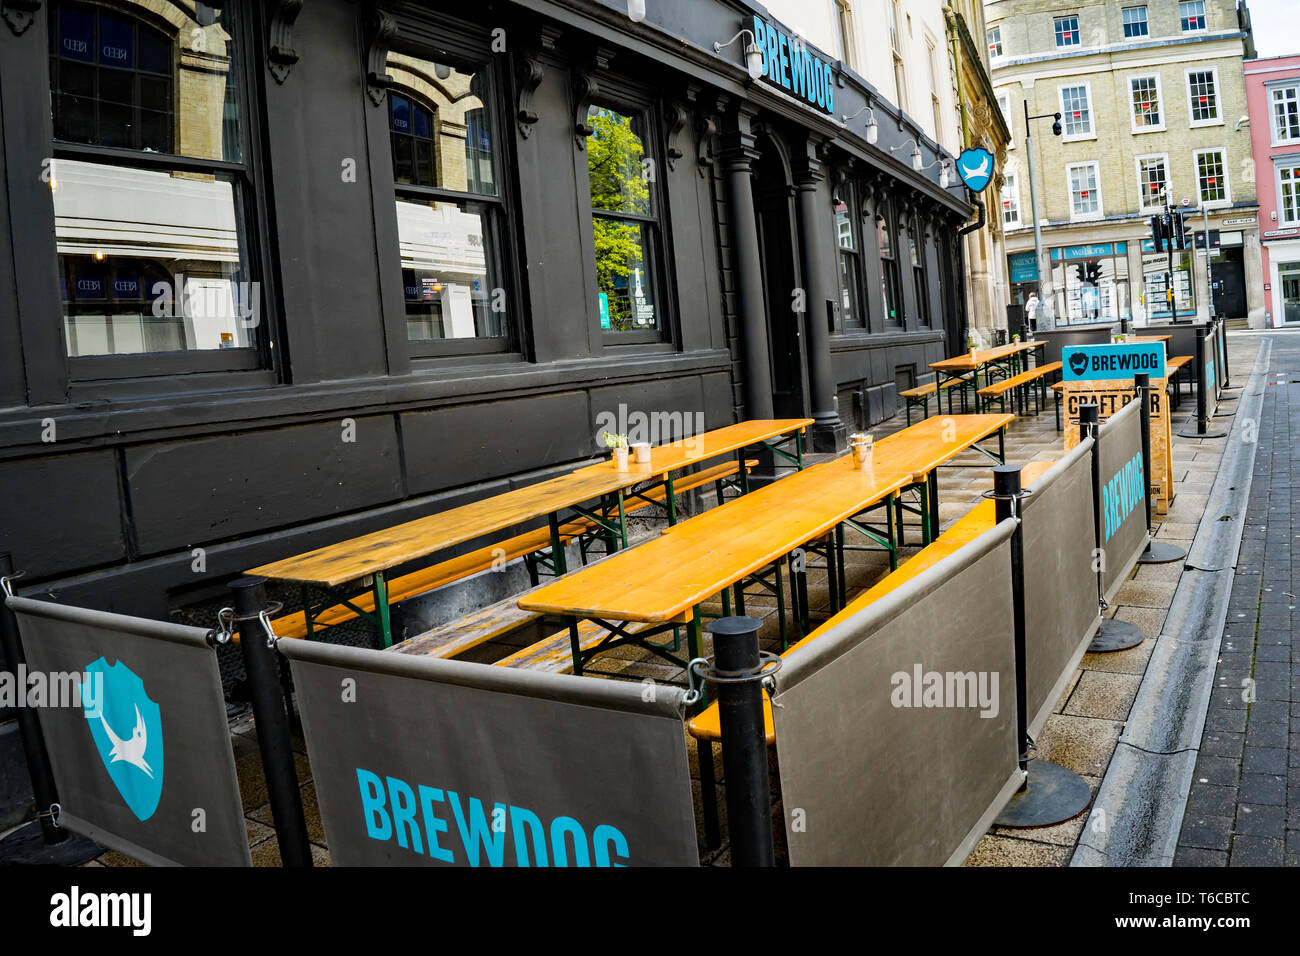 The entrance and outside seating area of Brew Dog, a popular drinking hole located in Queen Street, Norwich, Norfolk. Captured on a dull, overcast and Stock Photo